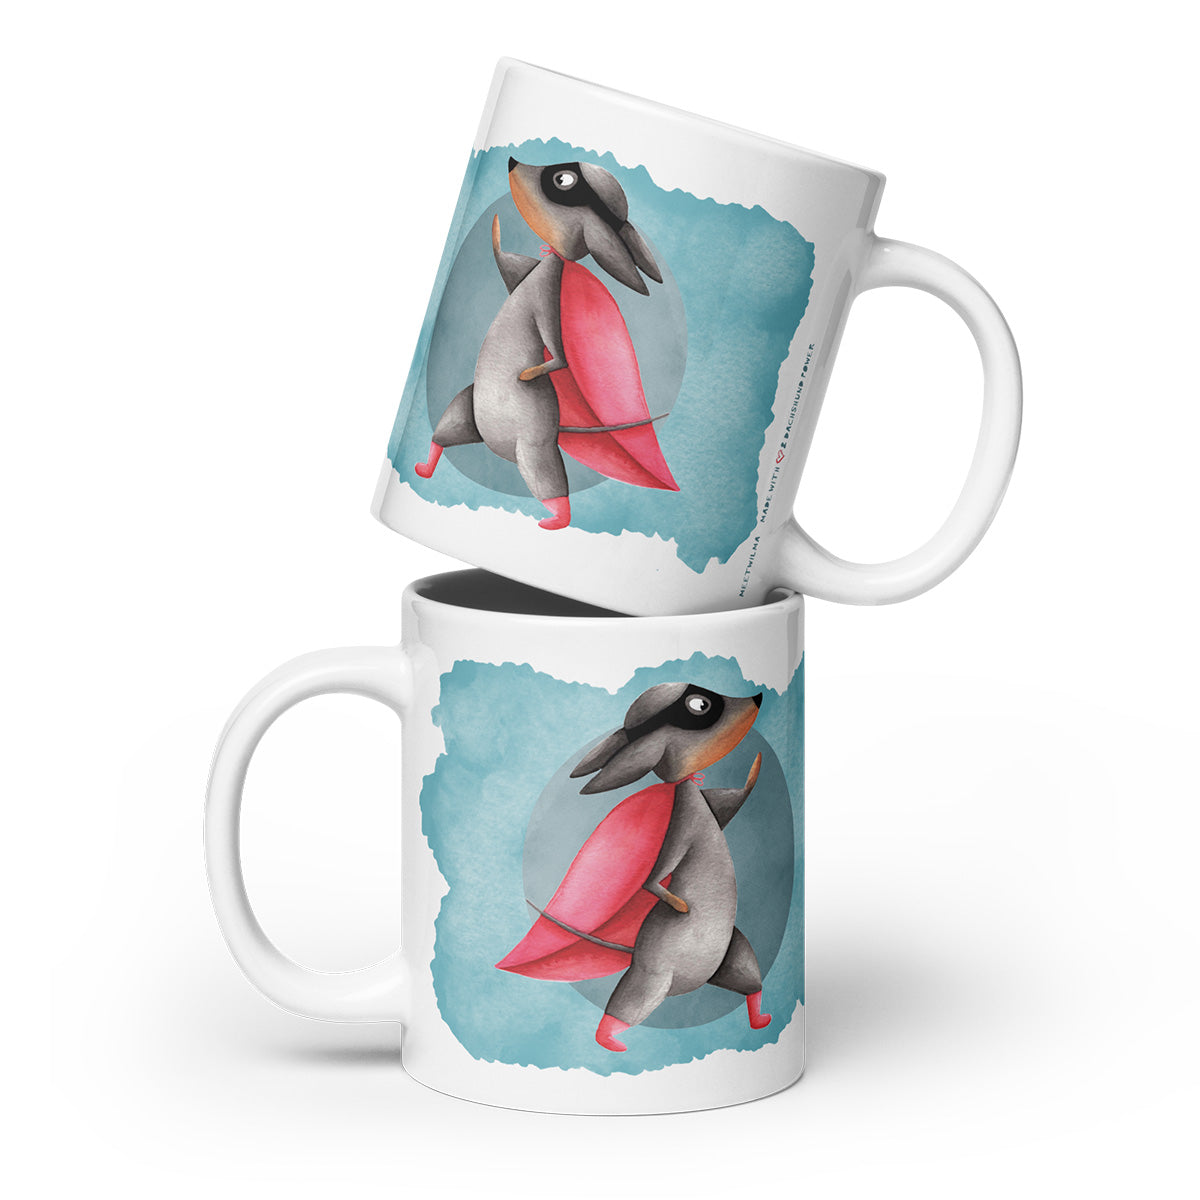 2 stacked Mugs with a Dachshund wearing a cape watercolor Illustration print - 20oz